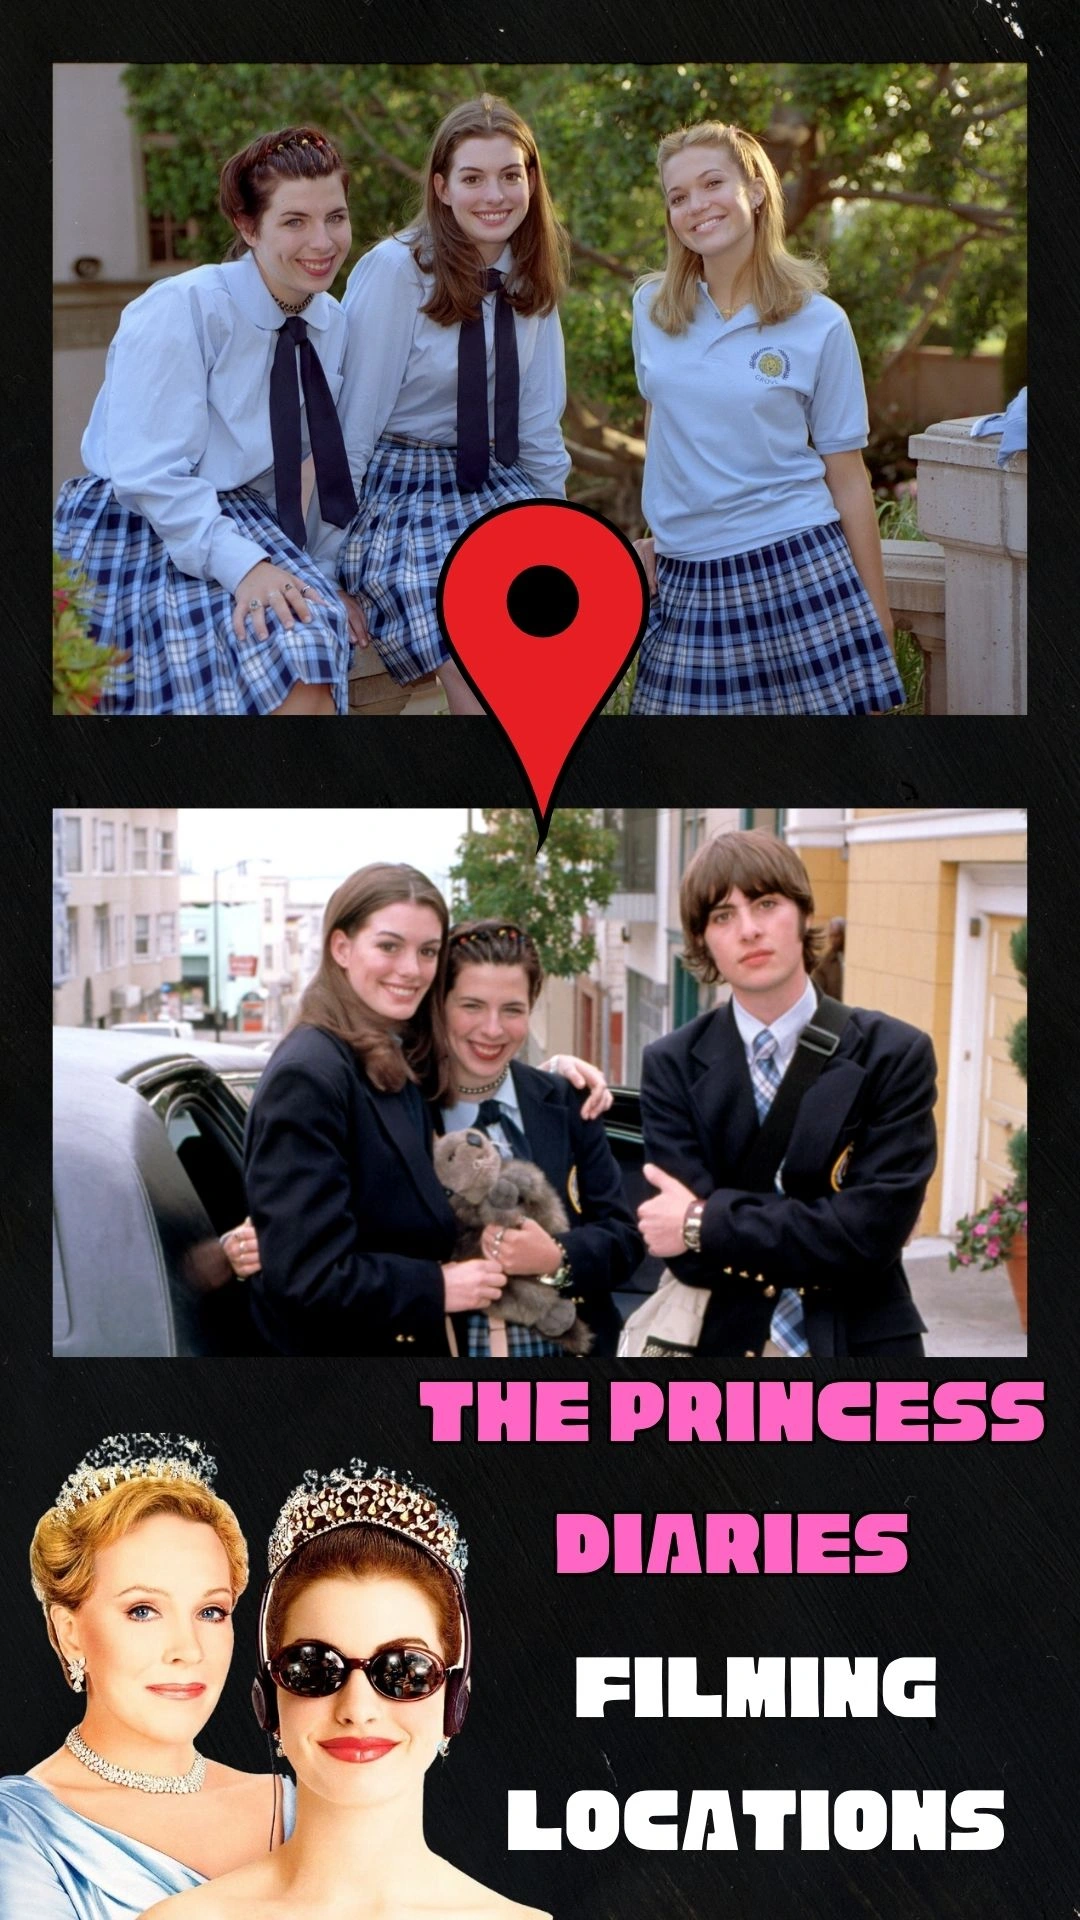 The Princess Diaries Filming Locations